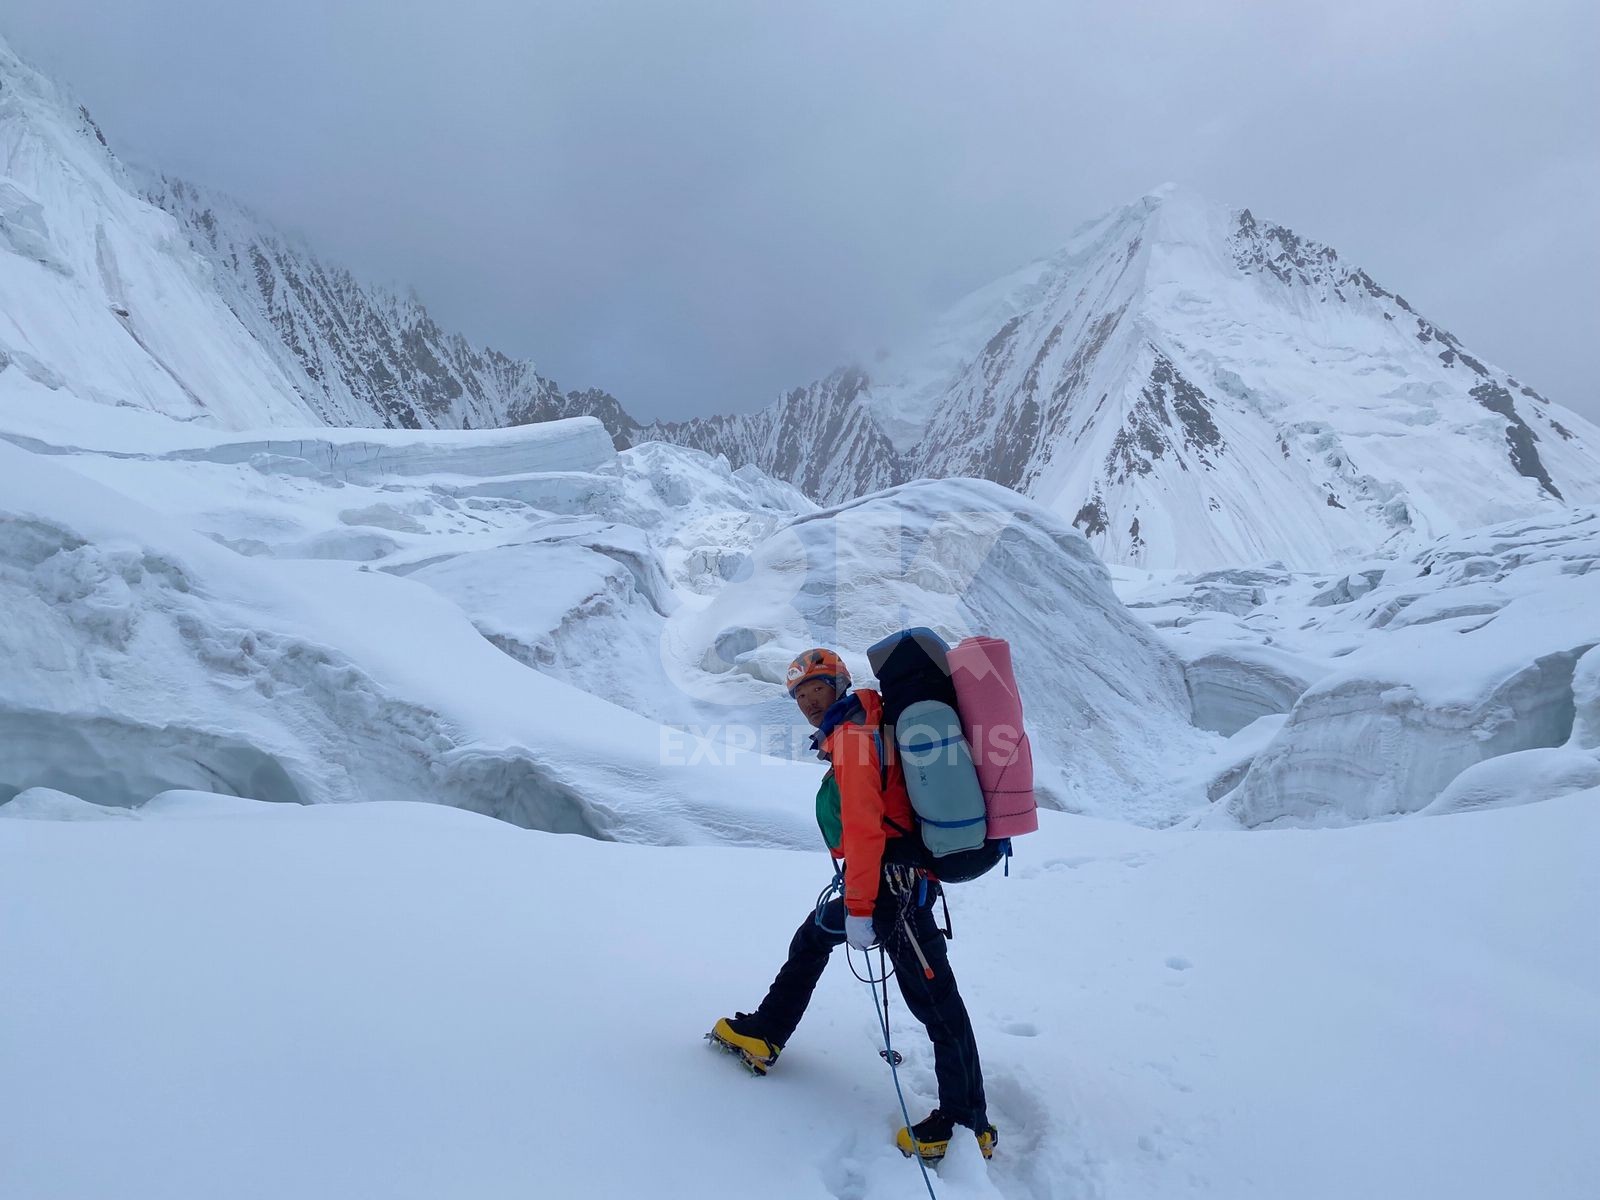 Gasherbrum 1 Expedition (8,080 M) | 11th Highest Mountain In The World |